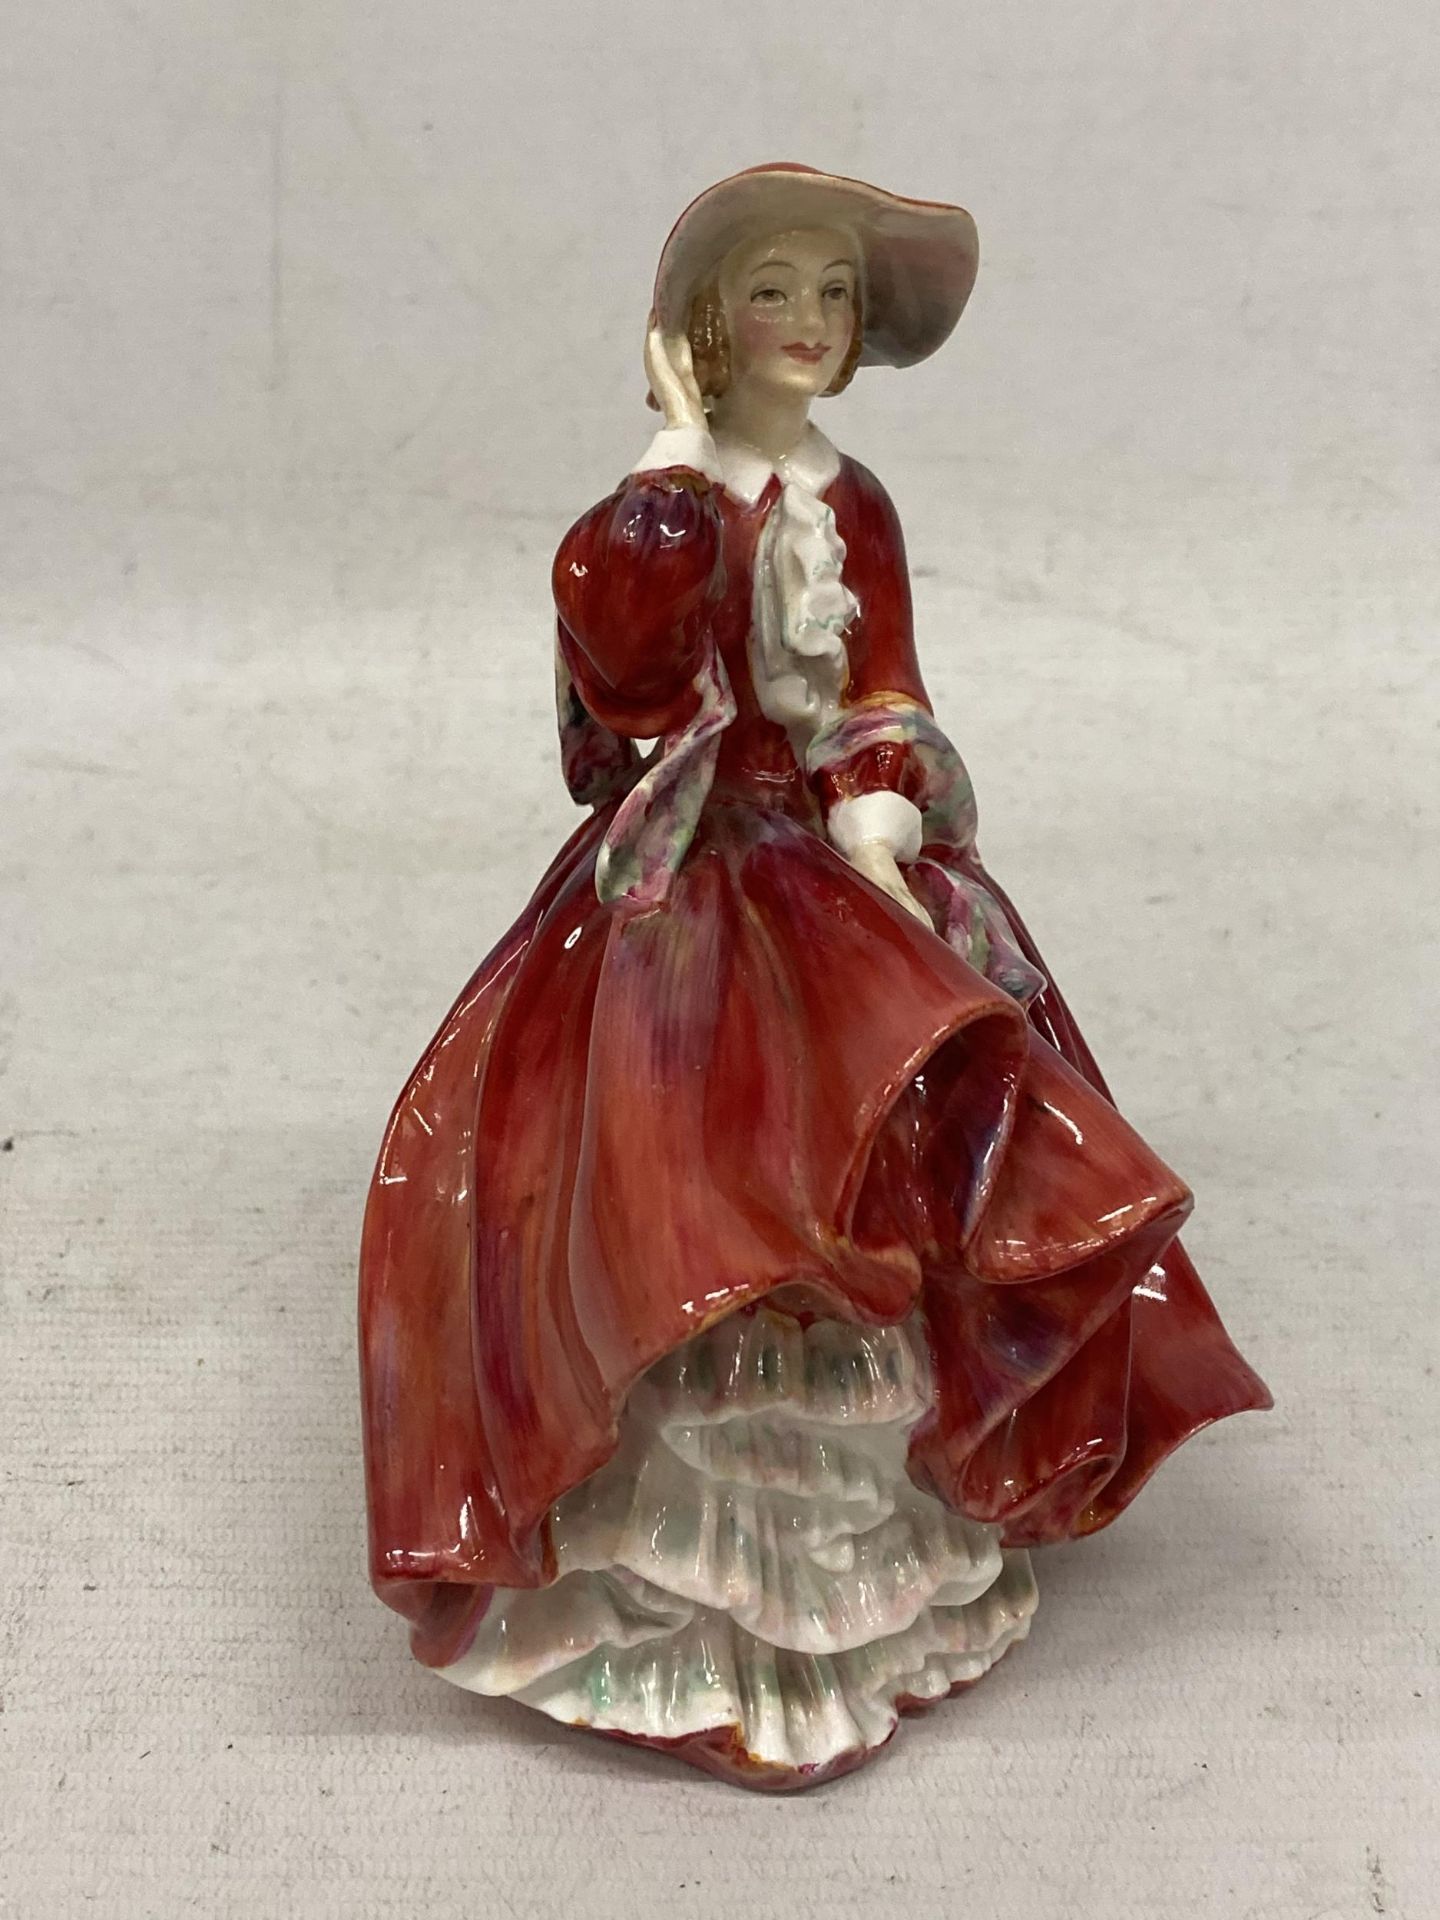 A ROYAL DOULTON 'TOP O' THE HILL' HN1834 LADY FIGURE - Image 2 of 4